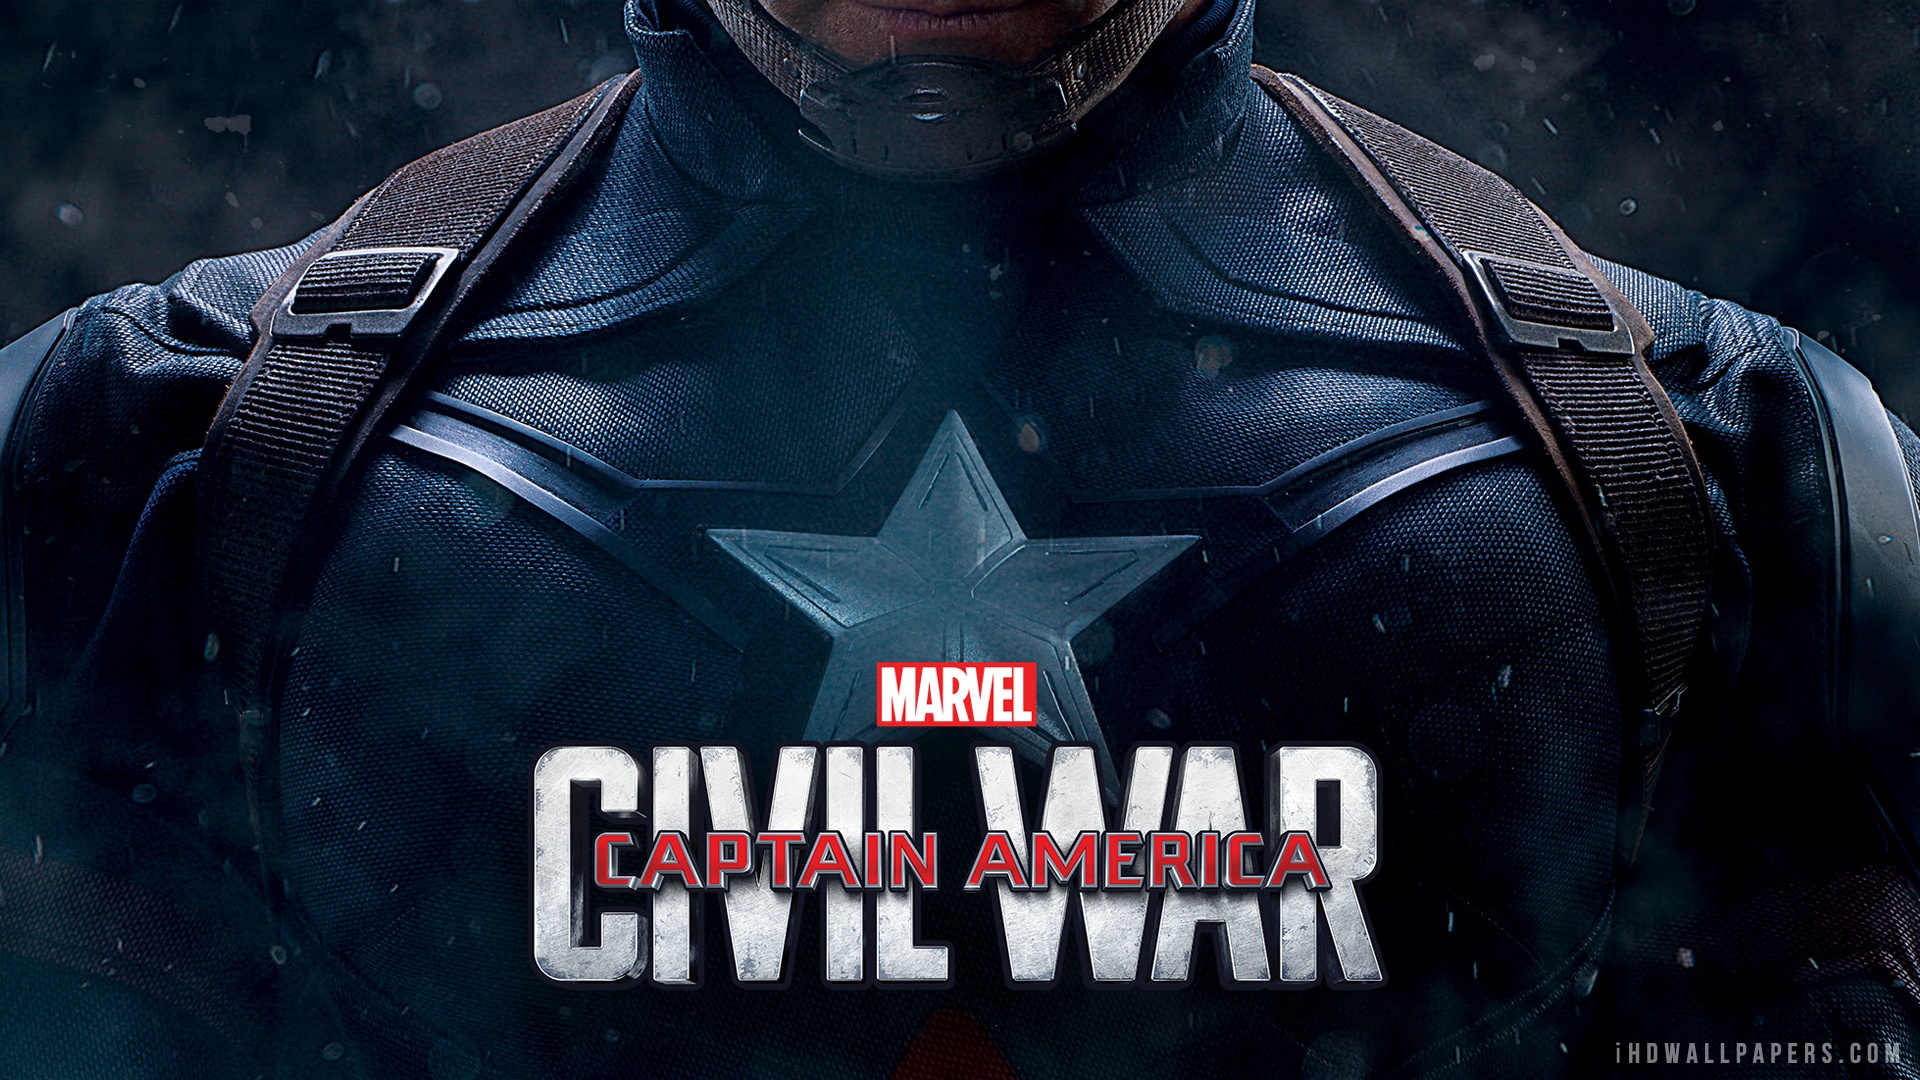 Captain America Civil War Movie Wallpaper From The Following